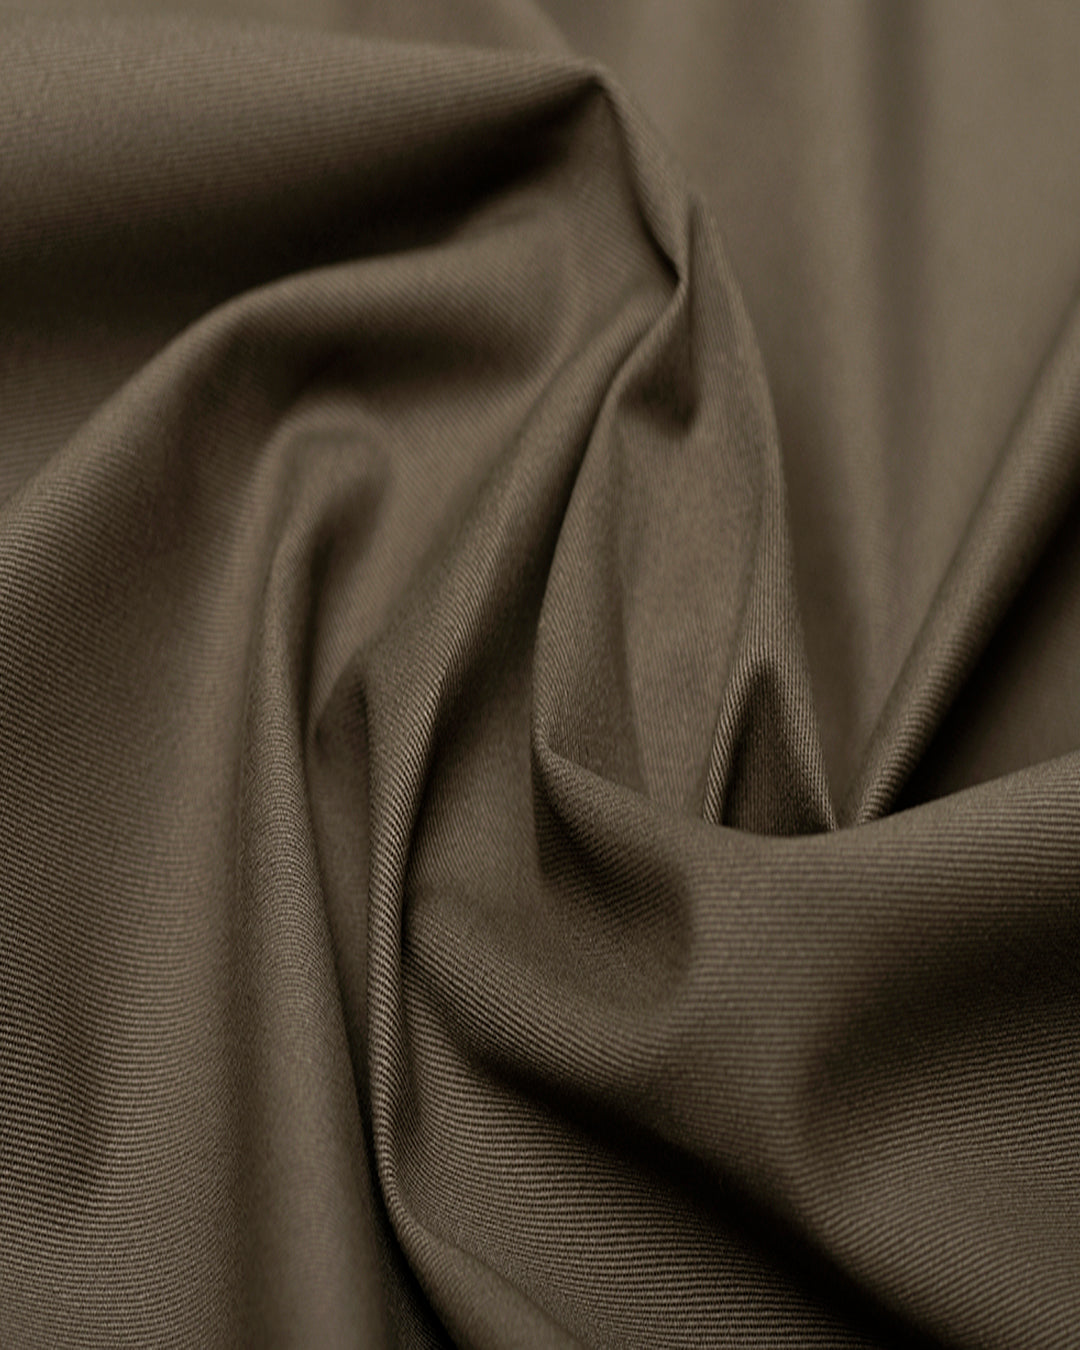 Closeup view of custom Genoa Chino pants for men by Luxire in khaki brown